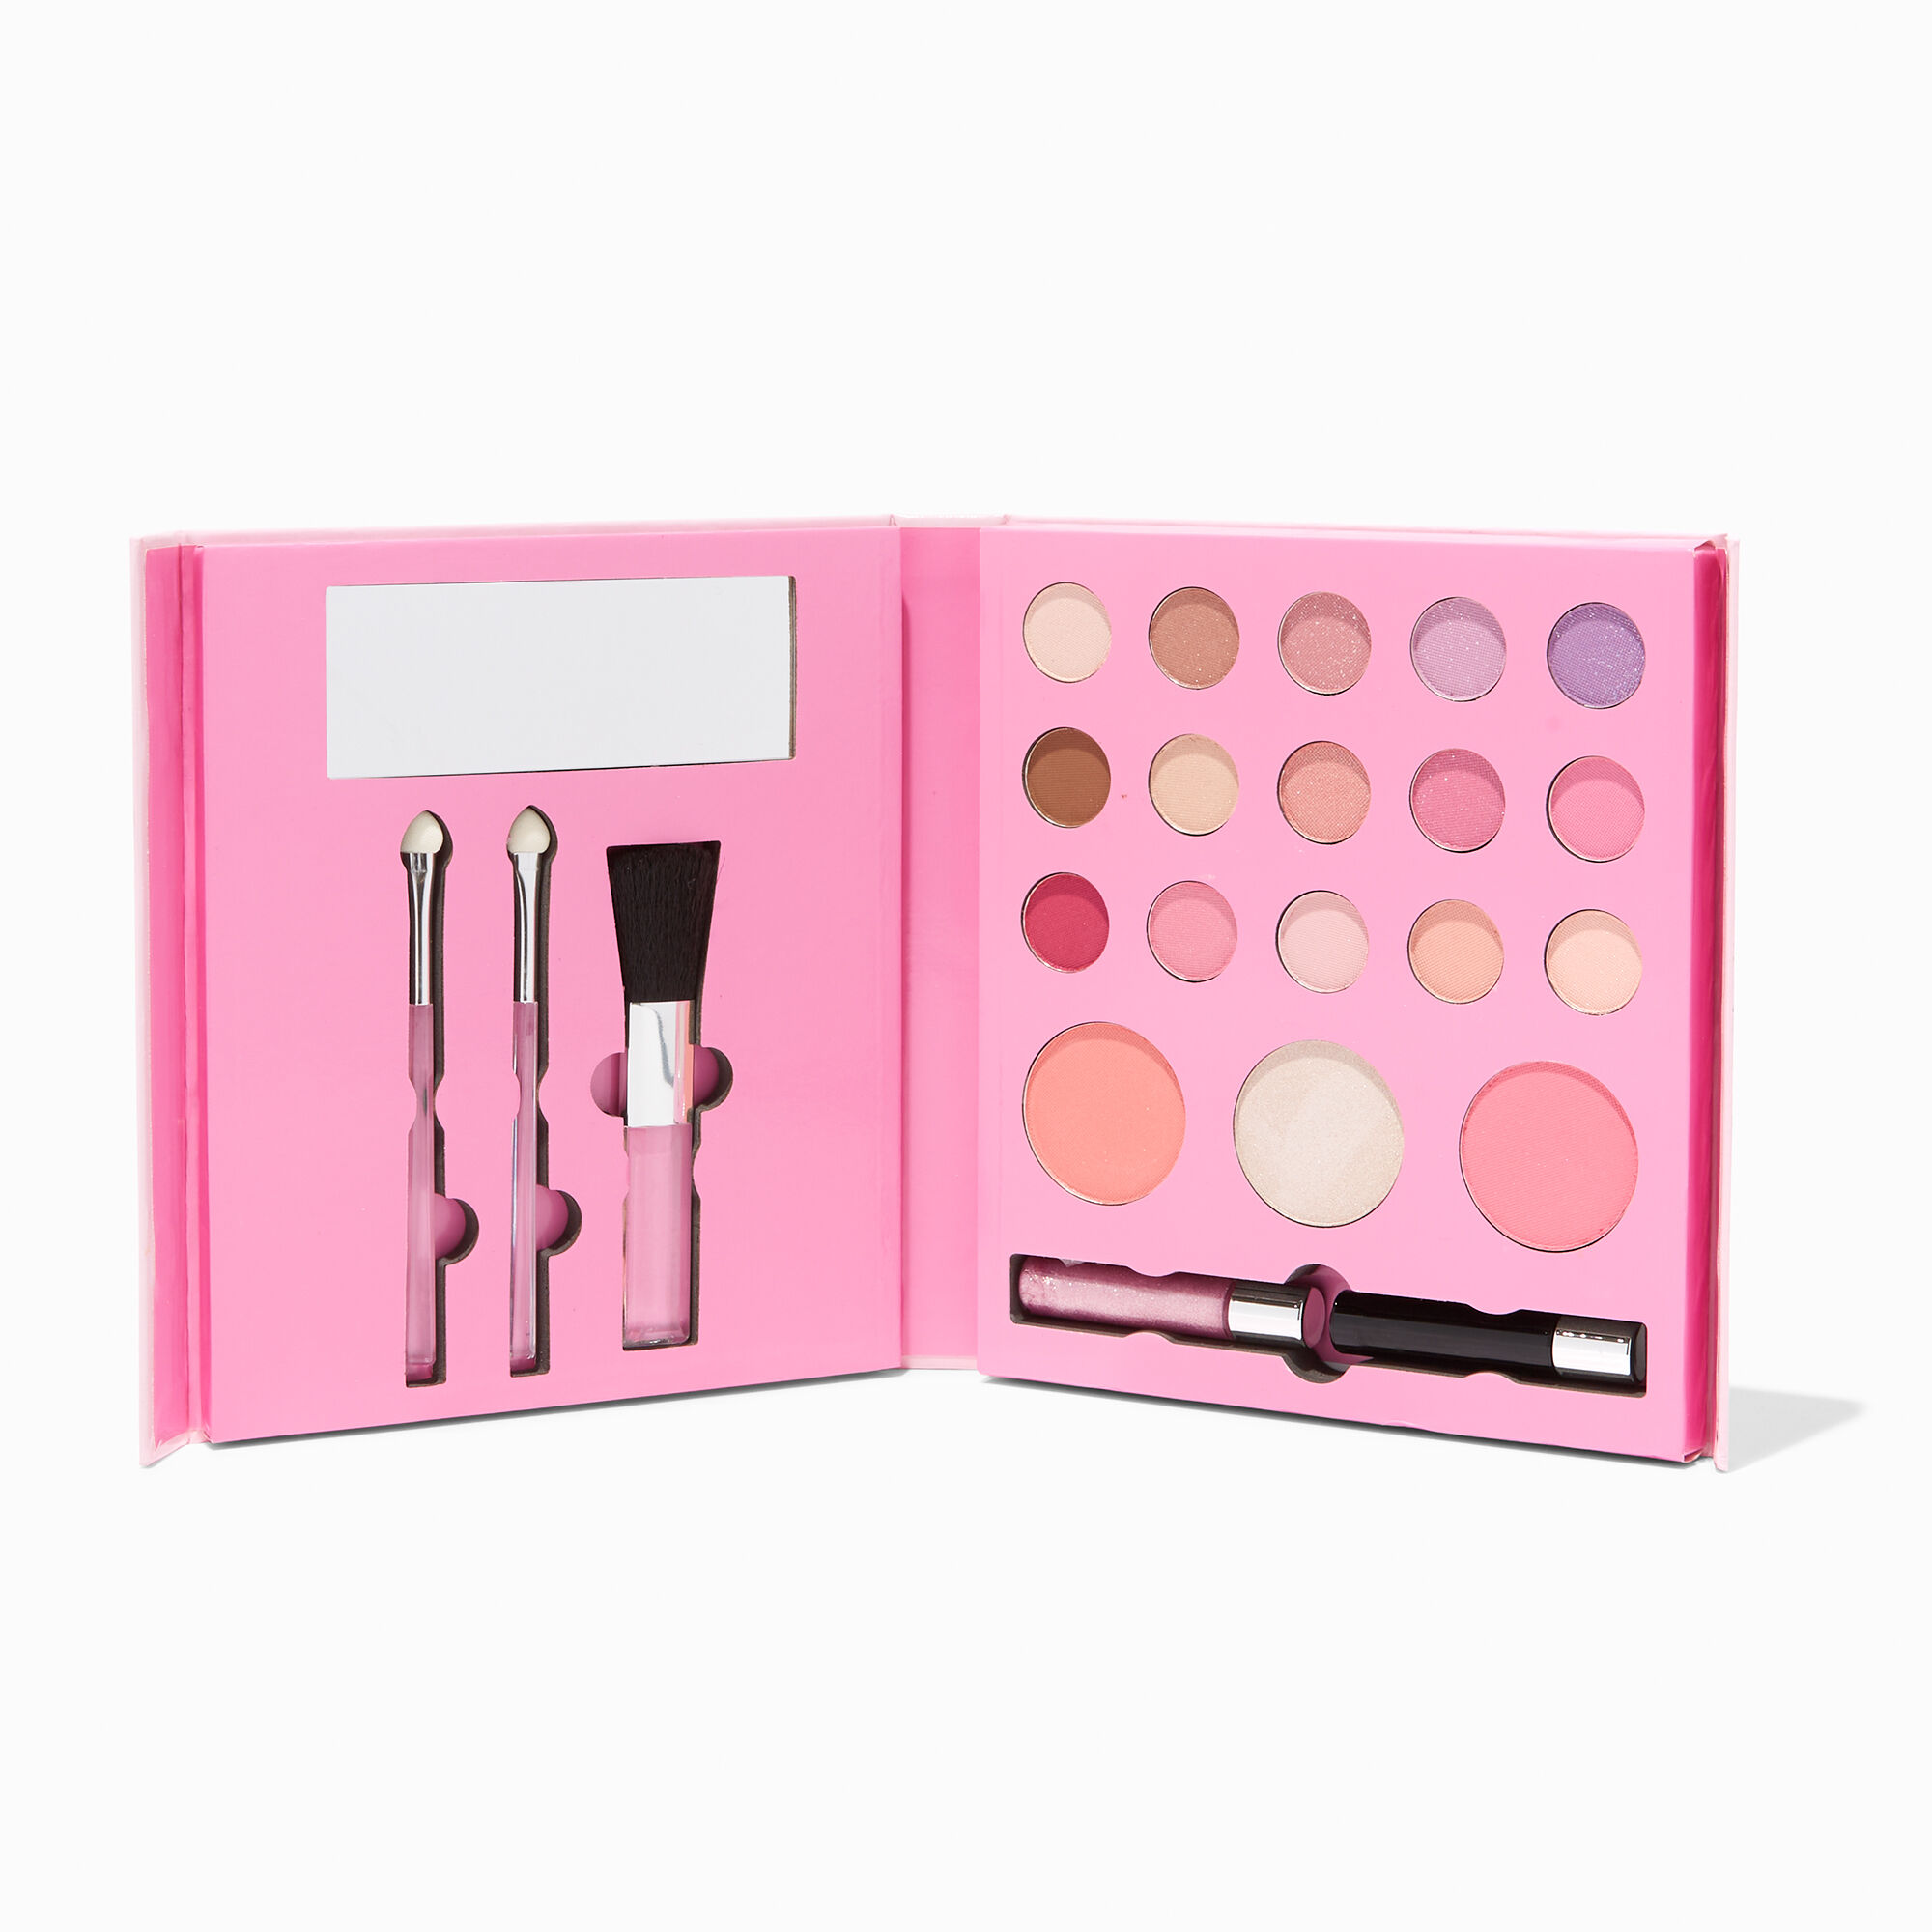 View Claires Butterfly Makeup Set Pink information